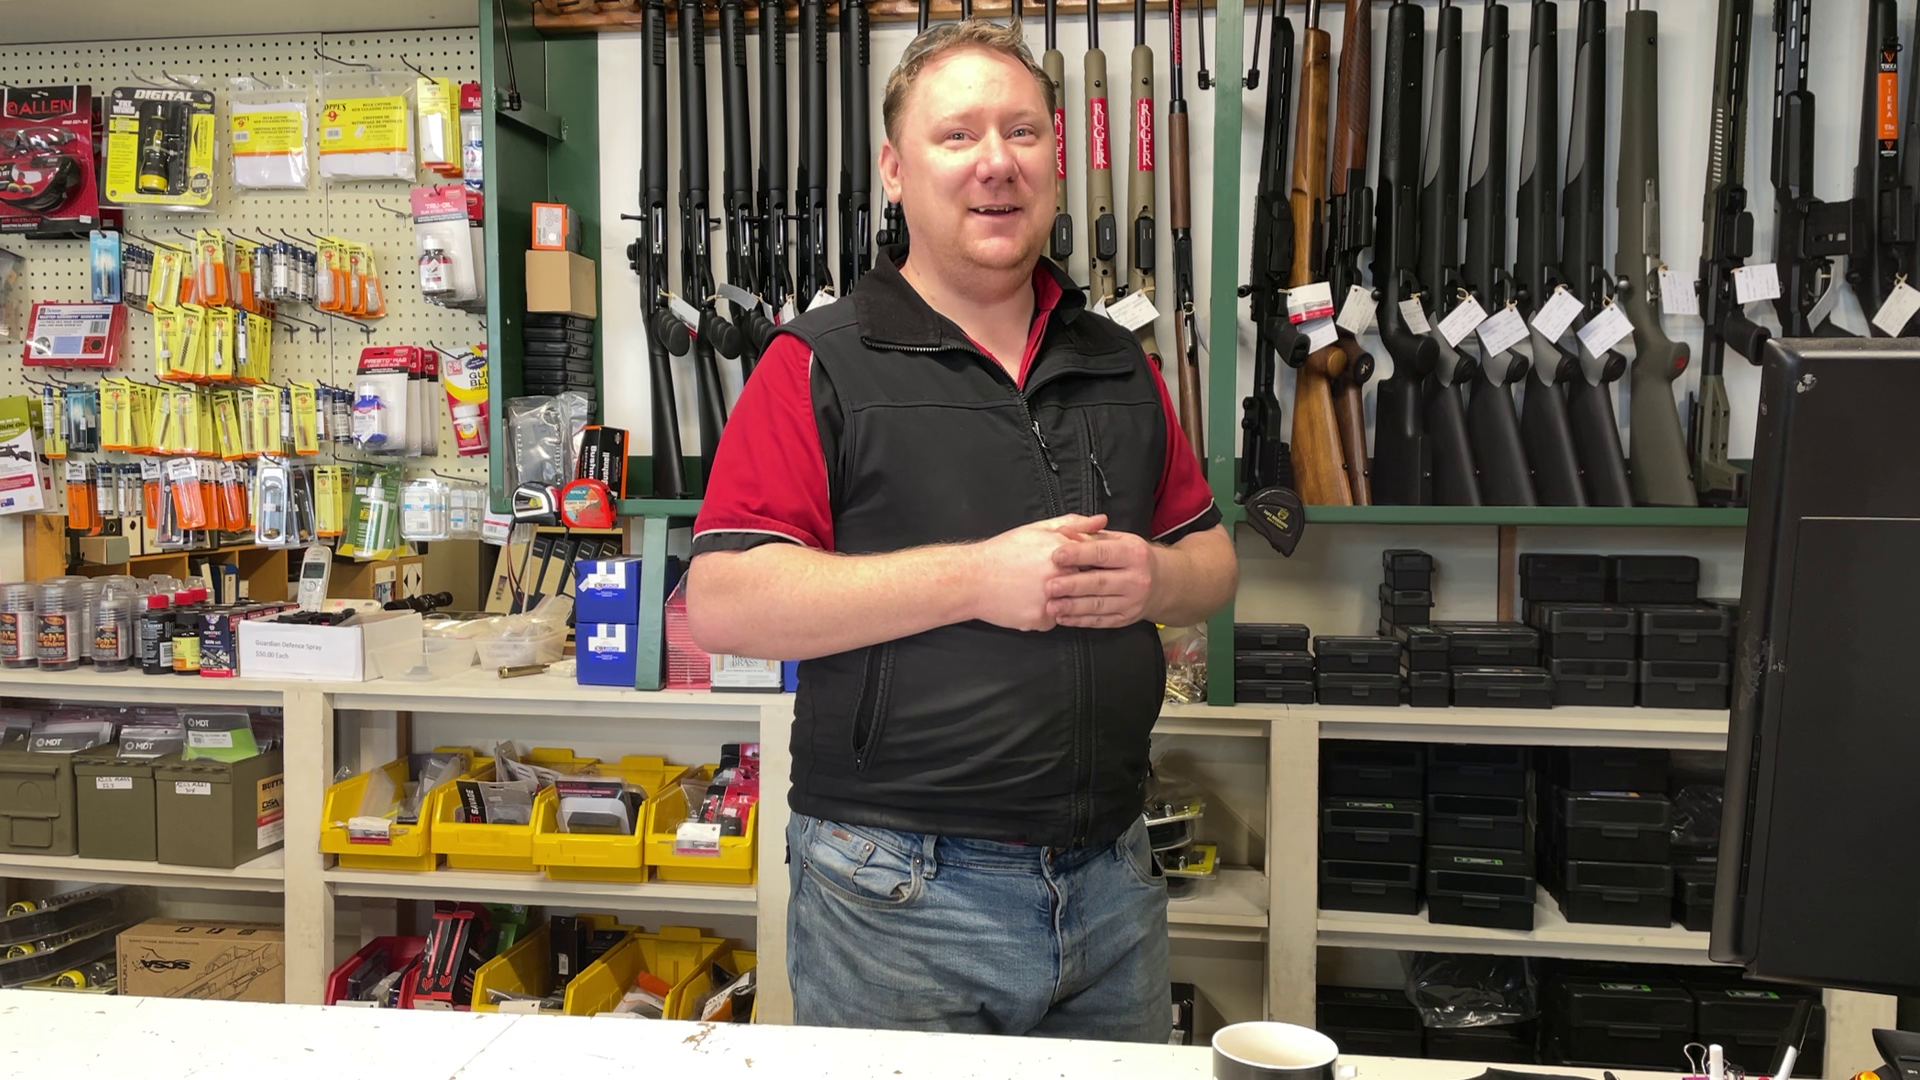 Zaine Beaton owner of Beaton firearms stands happily in his store as he talks with reporter. 